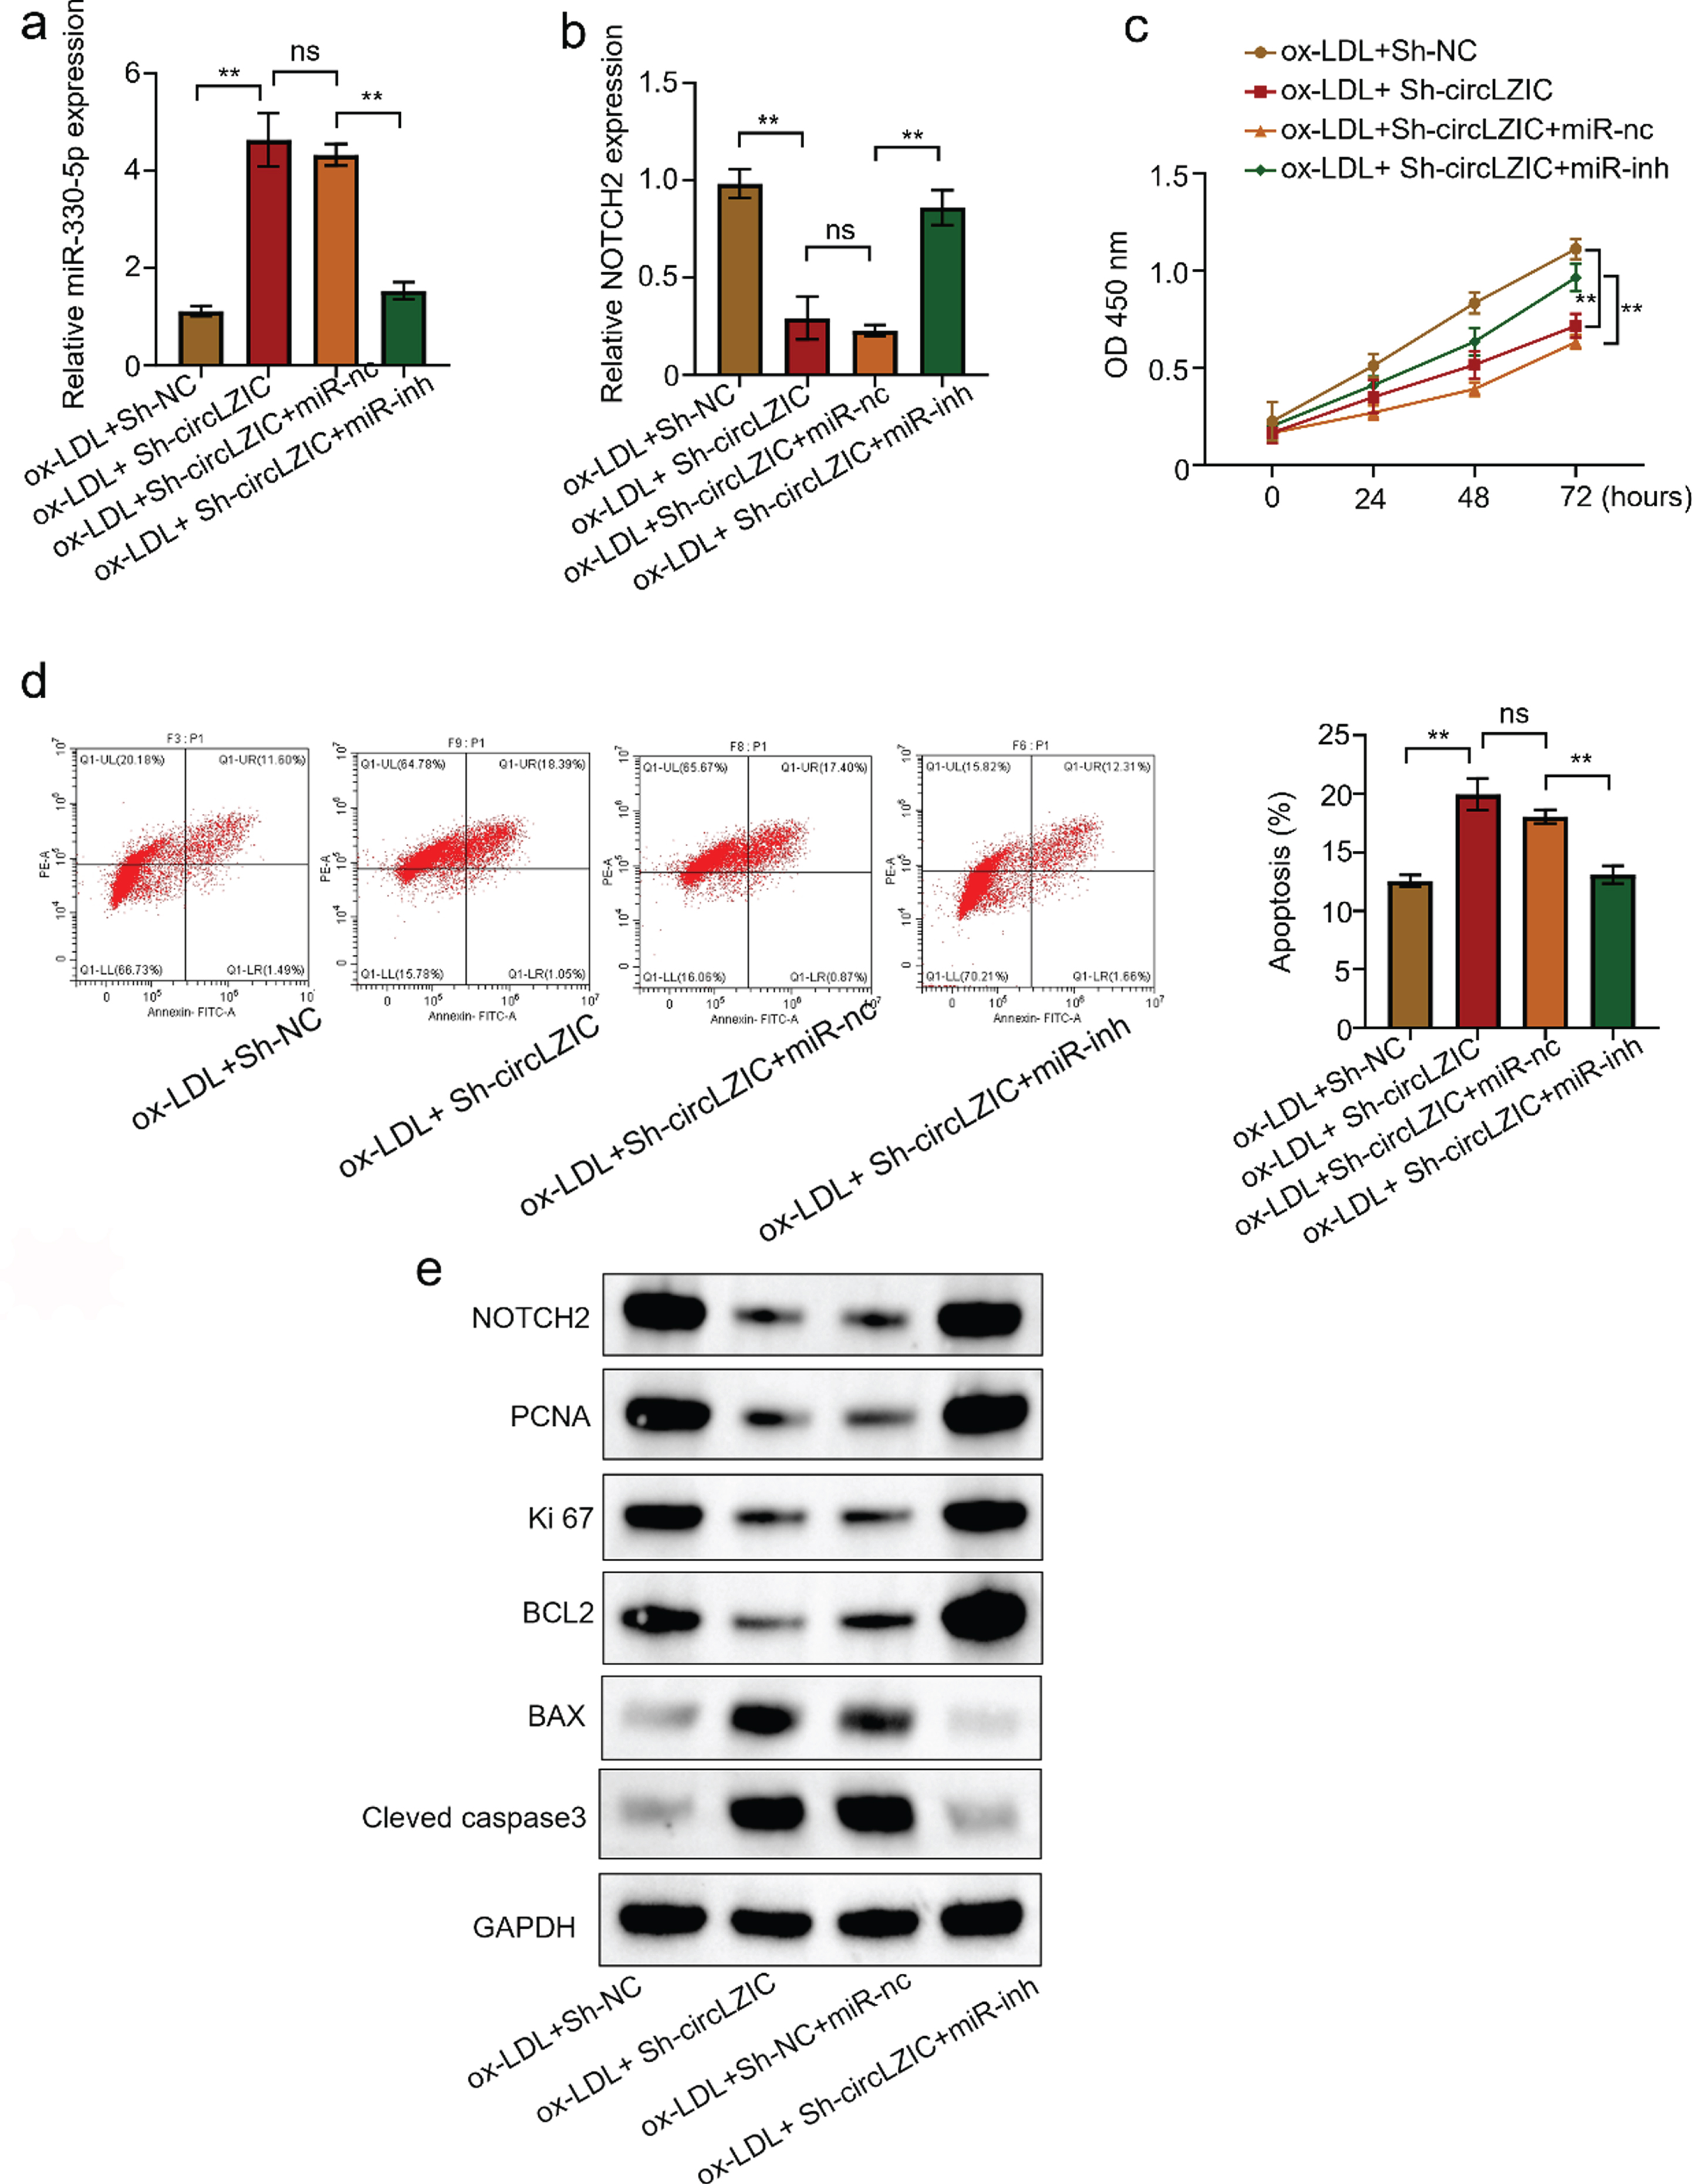 
CircLZIC regulates ox-LDL-induced vascular endothelial cell proliferation and apoptosis via Micro-330-5p/NOTCH2 axis. (A) qRT PCR was used to detect the expression of Micro-330-5p in different groups. (B) qRT PCR was used to detect the expression of NOTCH2 in different groups. (C) CCK-8 detected the changes in the activity of HUVECS cells in different groups. (D) Flow cytometry apoptosis assay was used to detect the changes in the proportion of HUVECs undergoing apoptosis in different groups. (E) Western blot was used to detect the expression of proliferation- and apoptosis-related proteins in different groups of HUVECs.